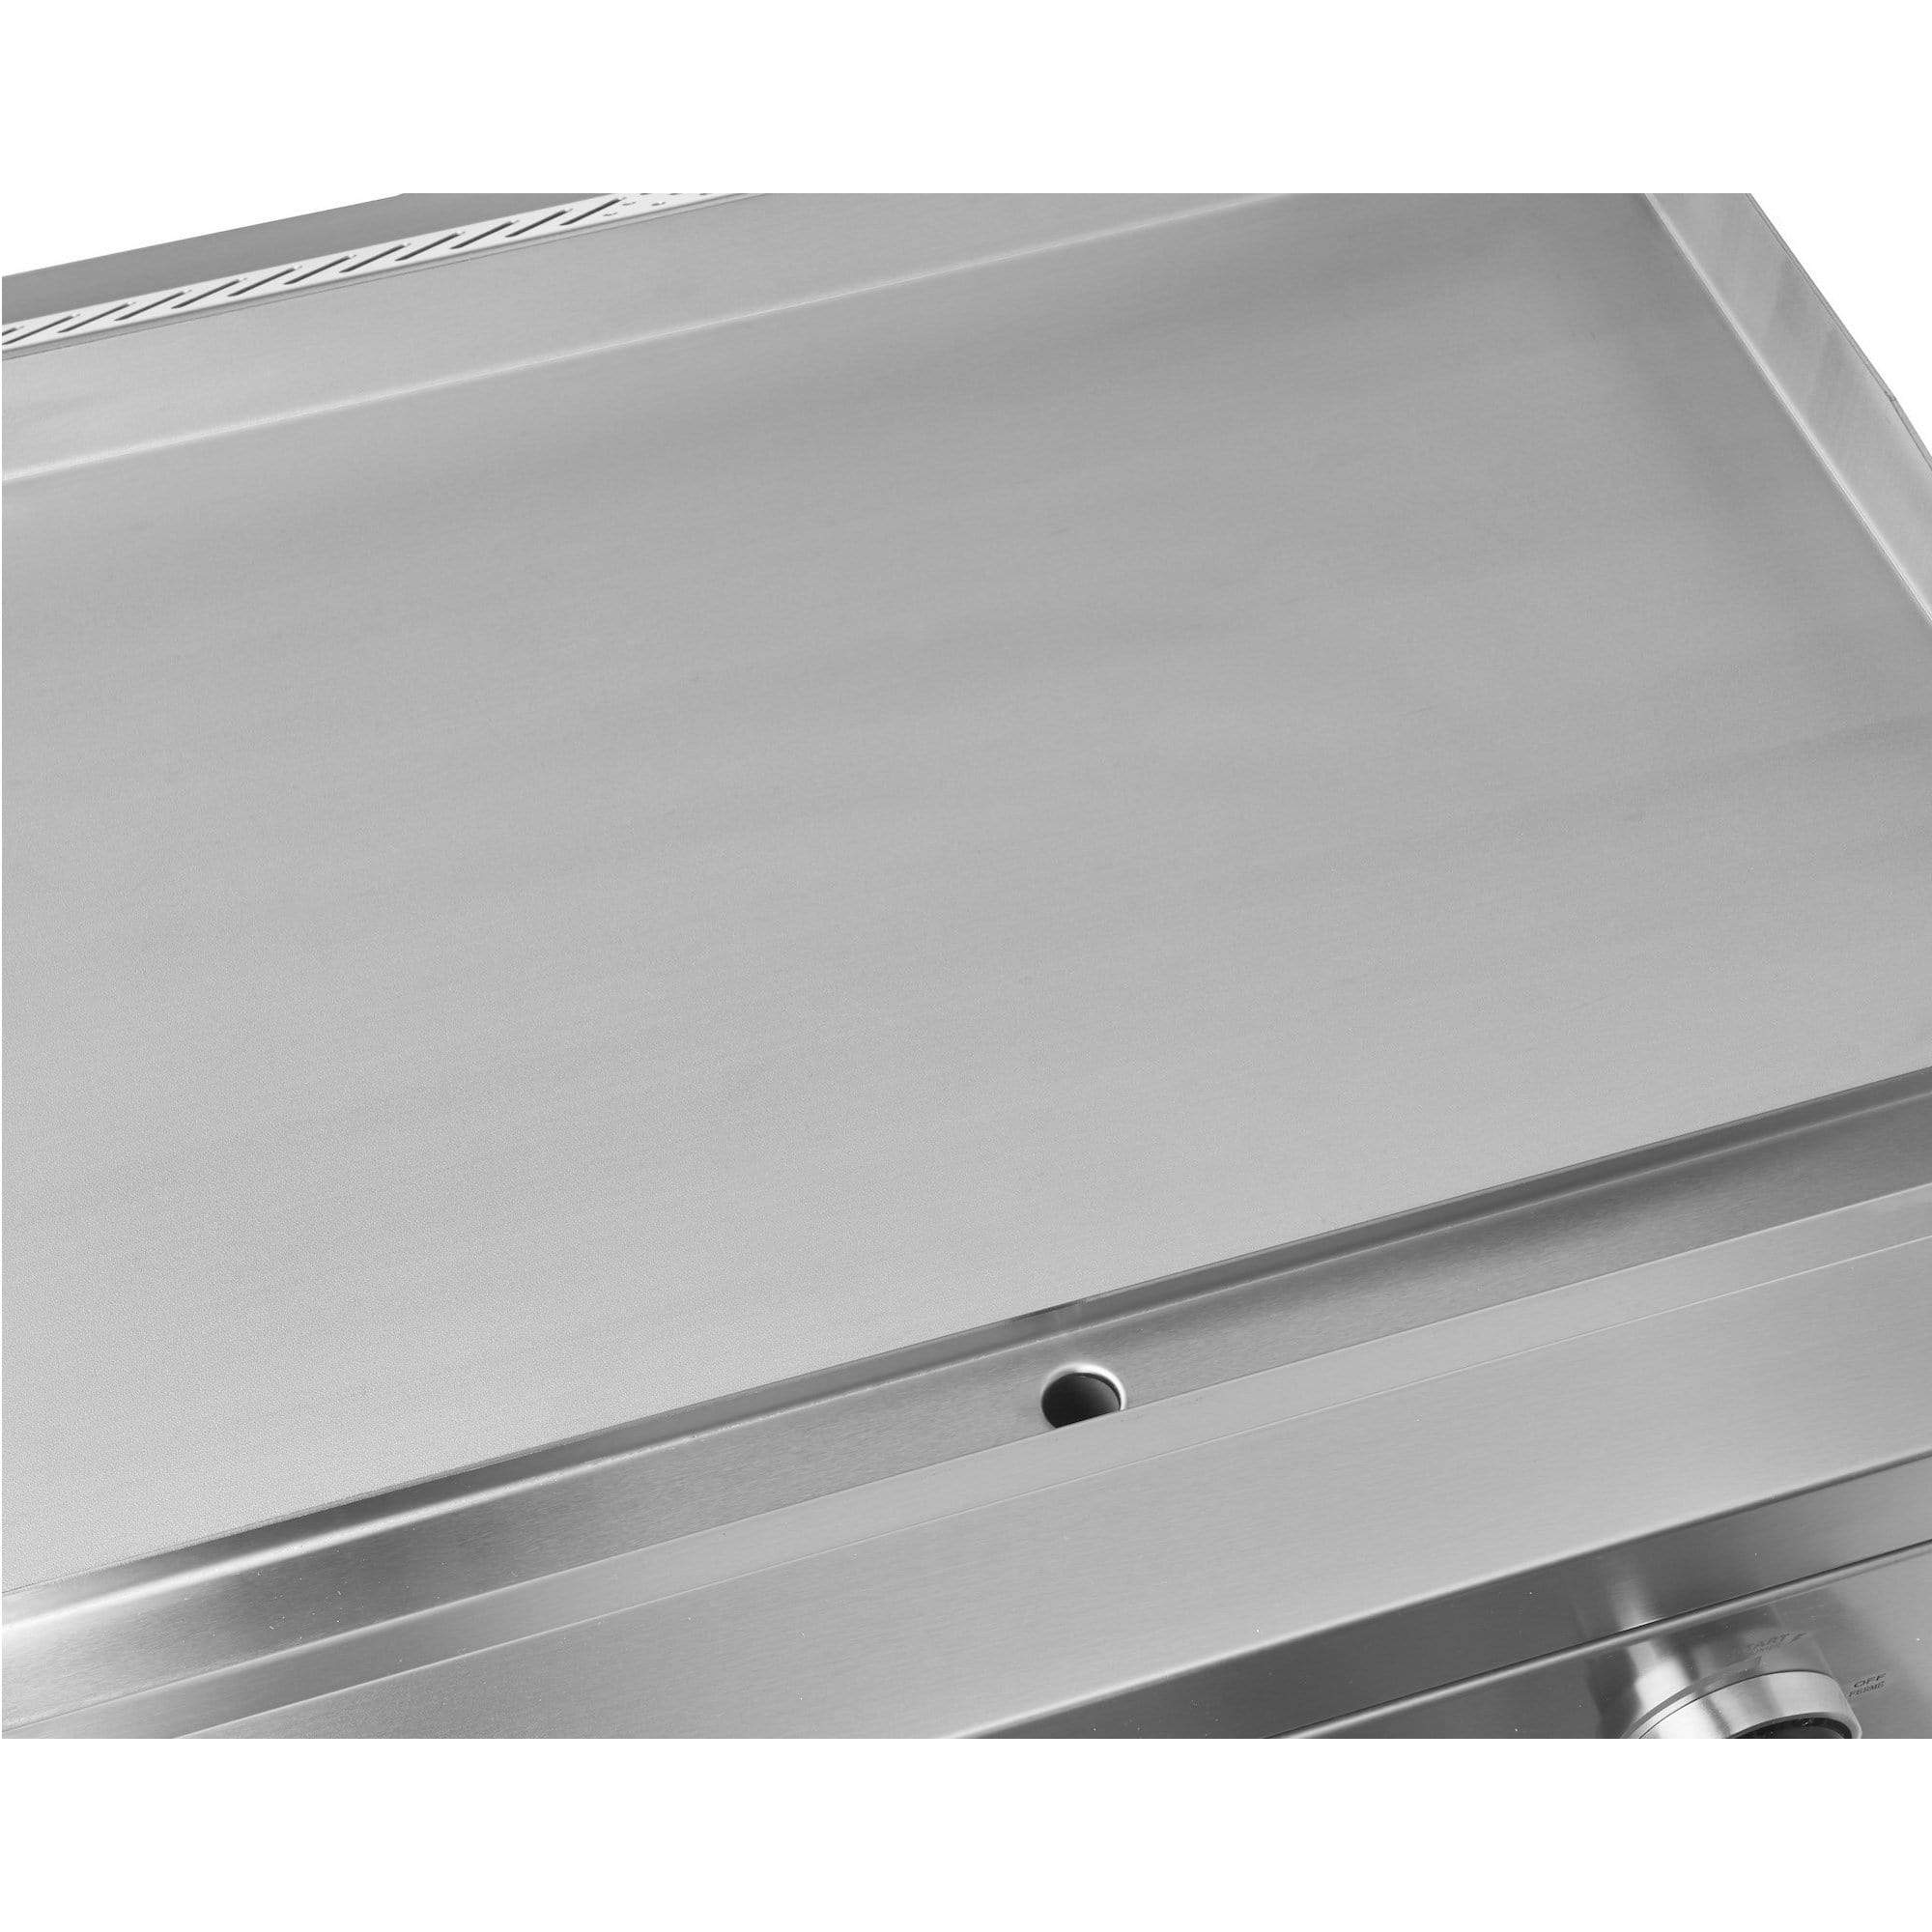 Fuego F27S-Griddle 304SS Built-in Liquid Propane